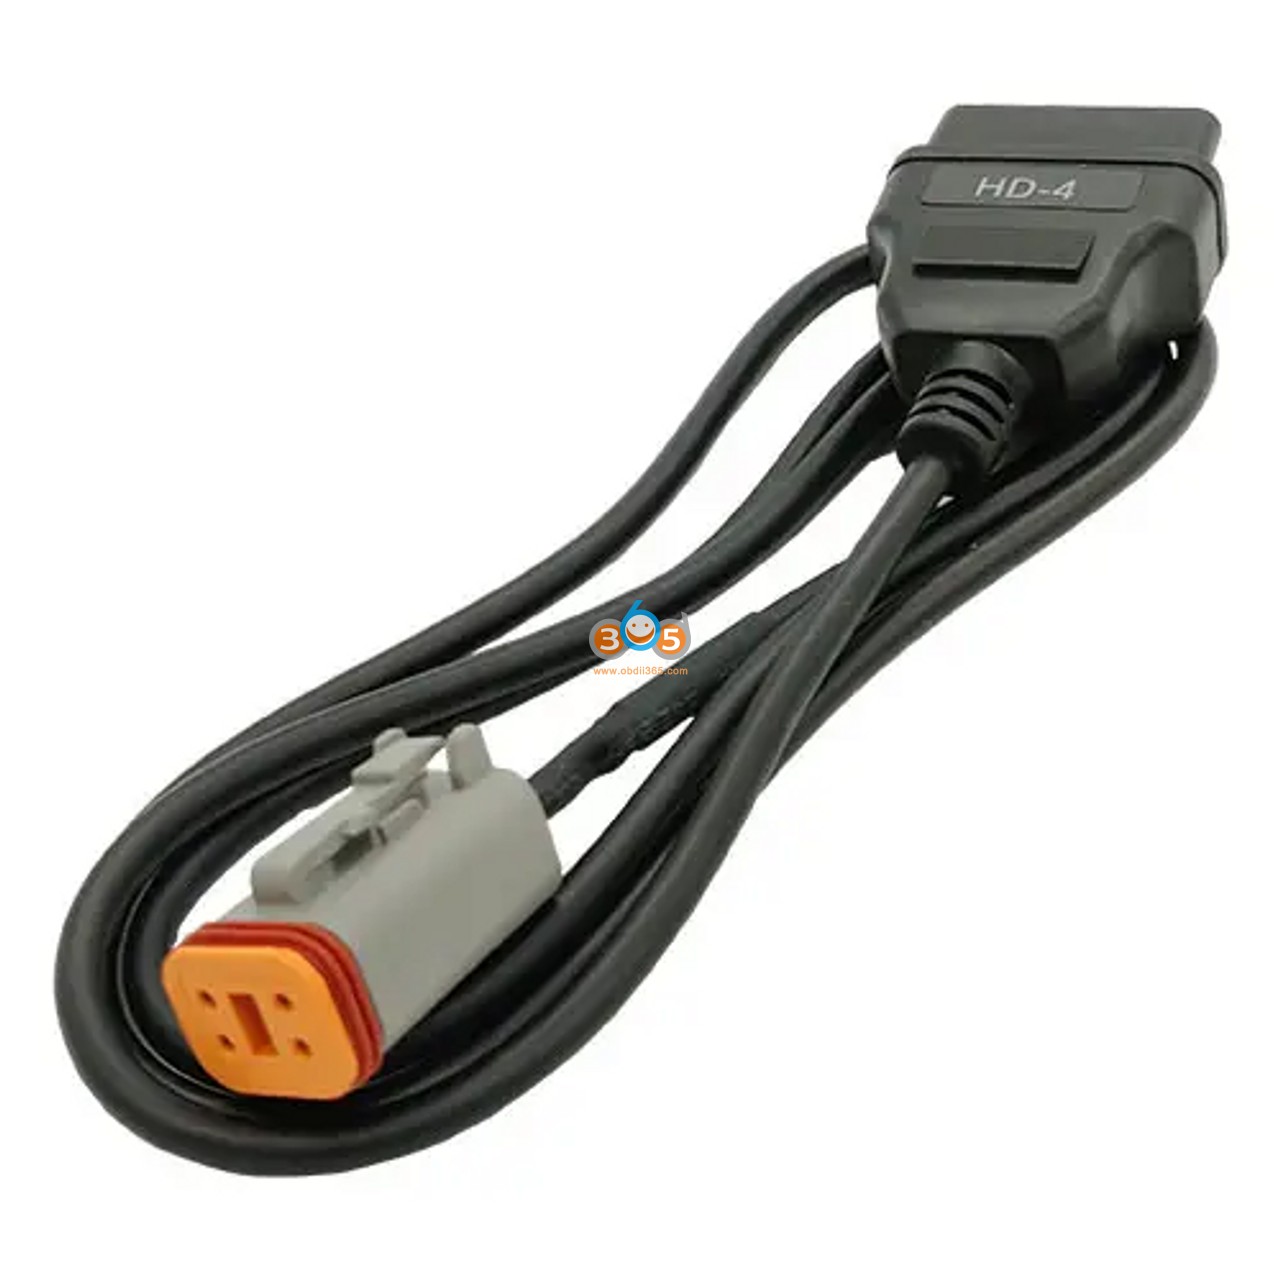 4 Pins to OBD2 Full Diagnosis Cable, Motorcycle 4Pin OBD